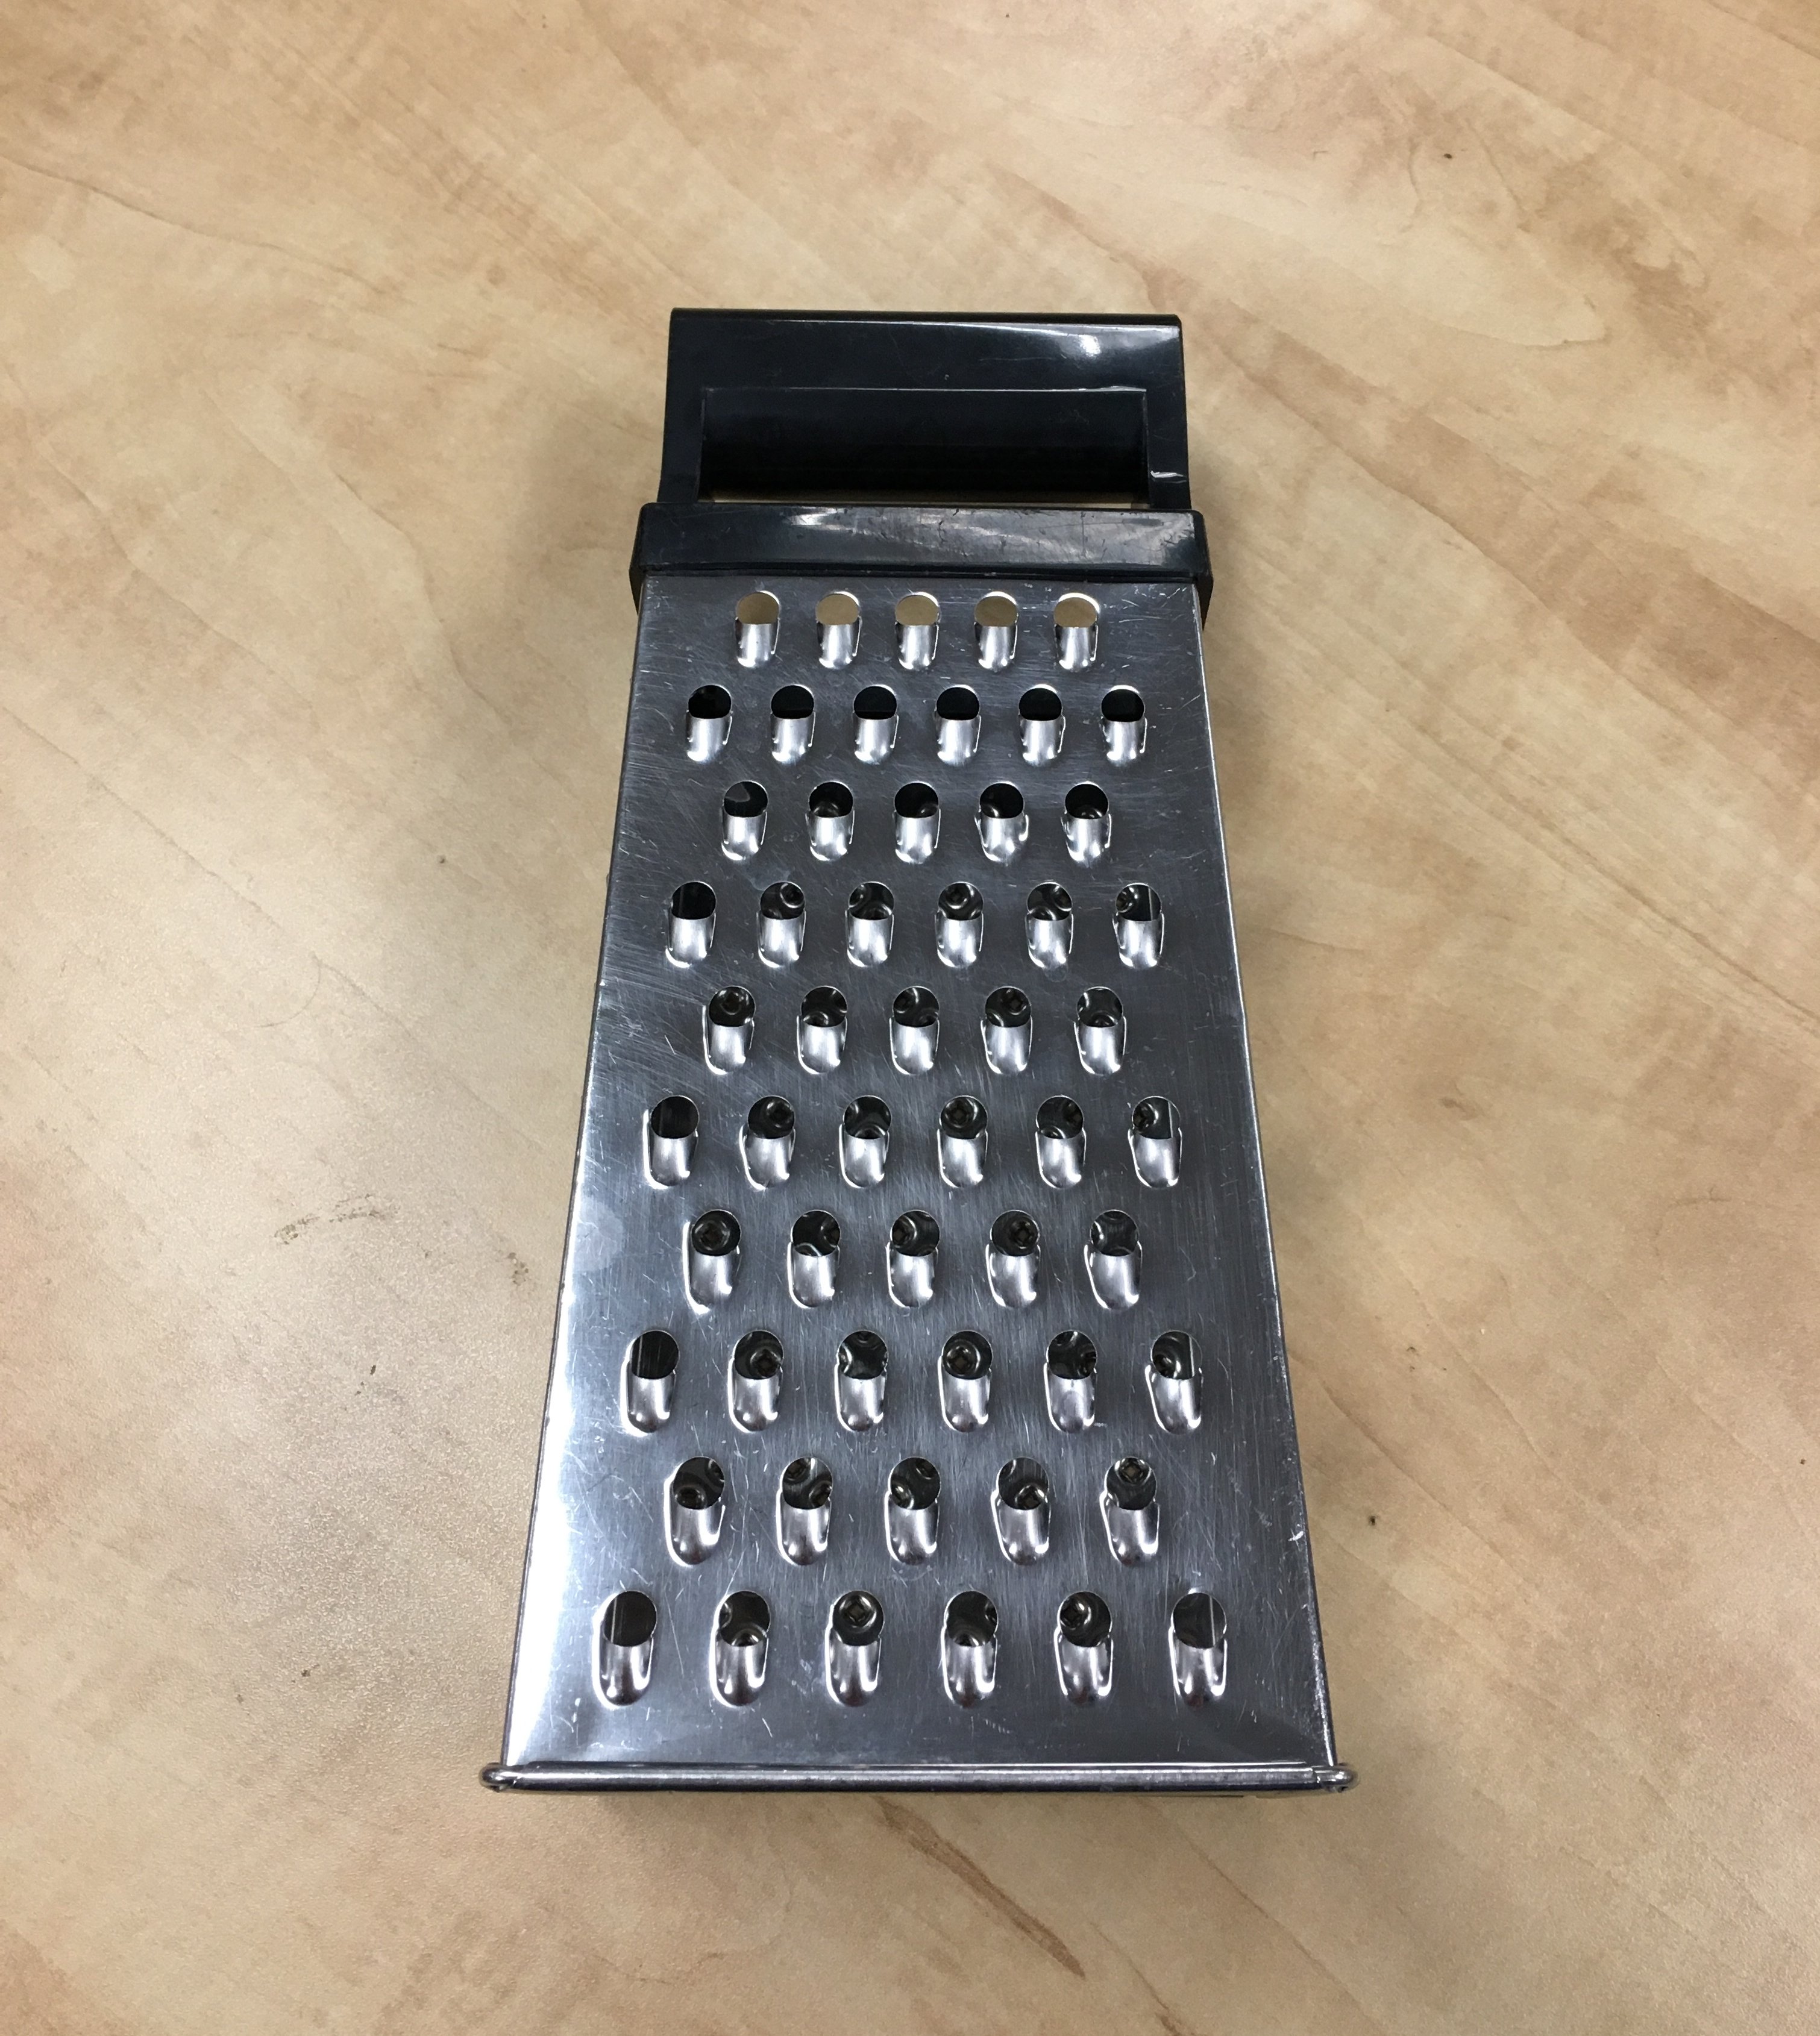 The most commonly used side of a box grate.